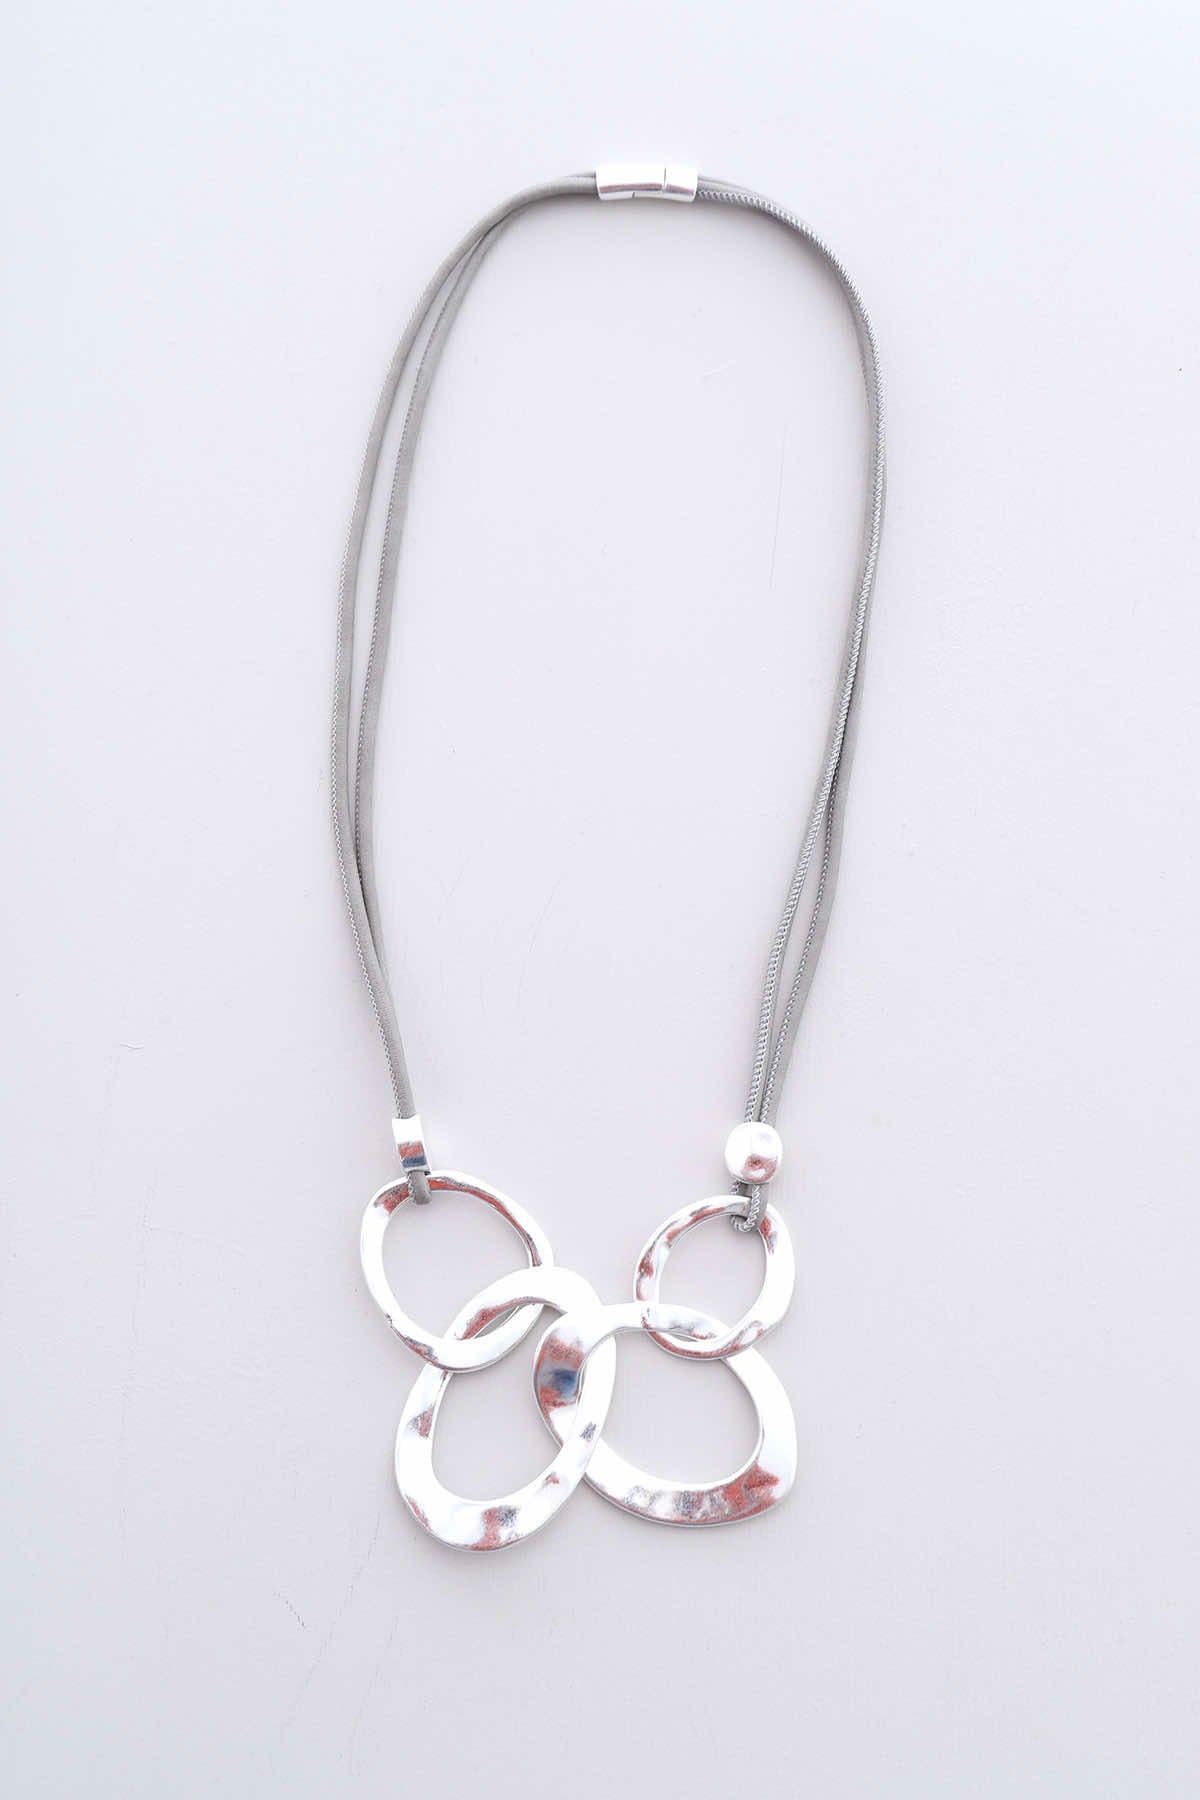 Indira Necklace Silver